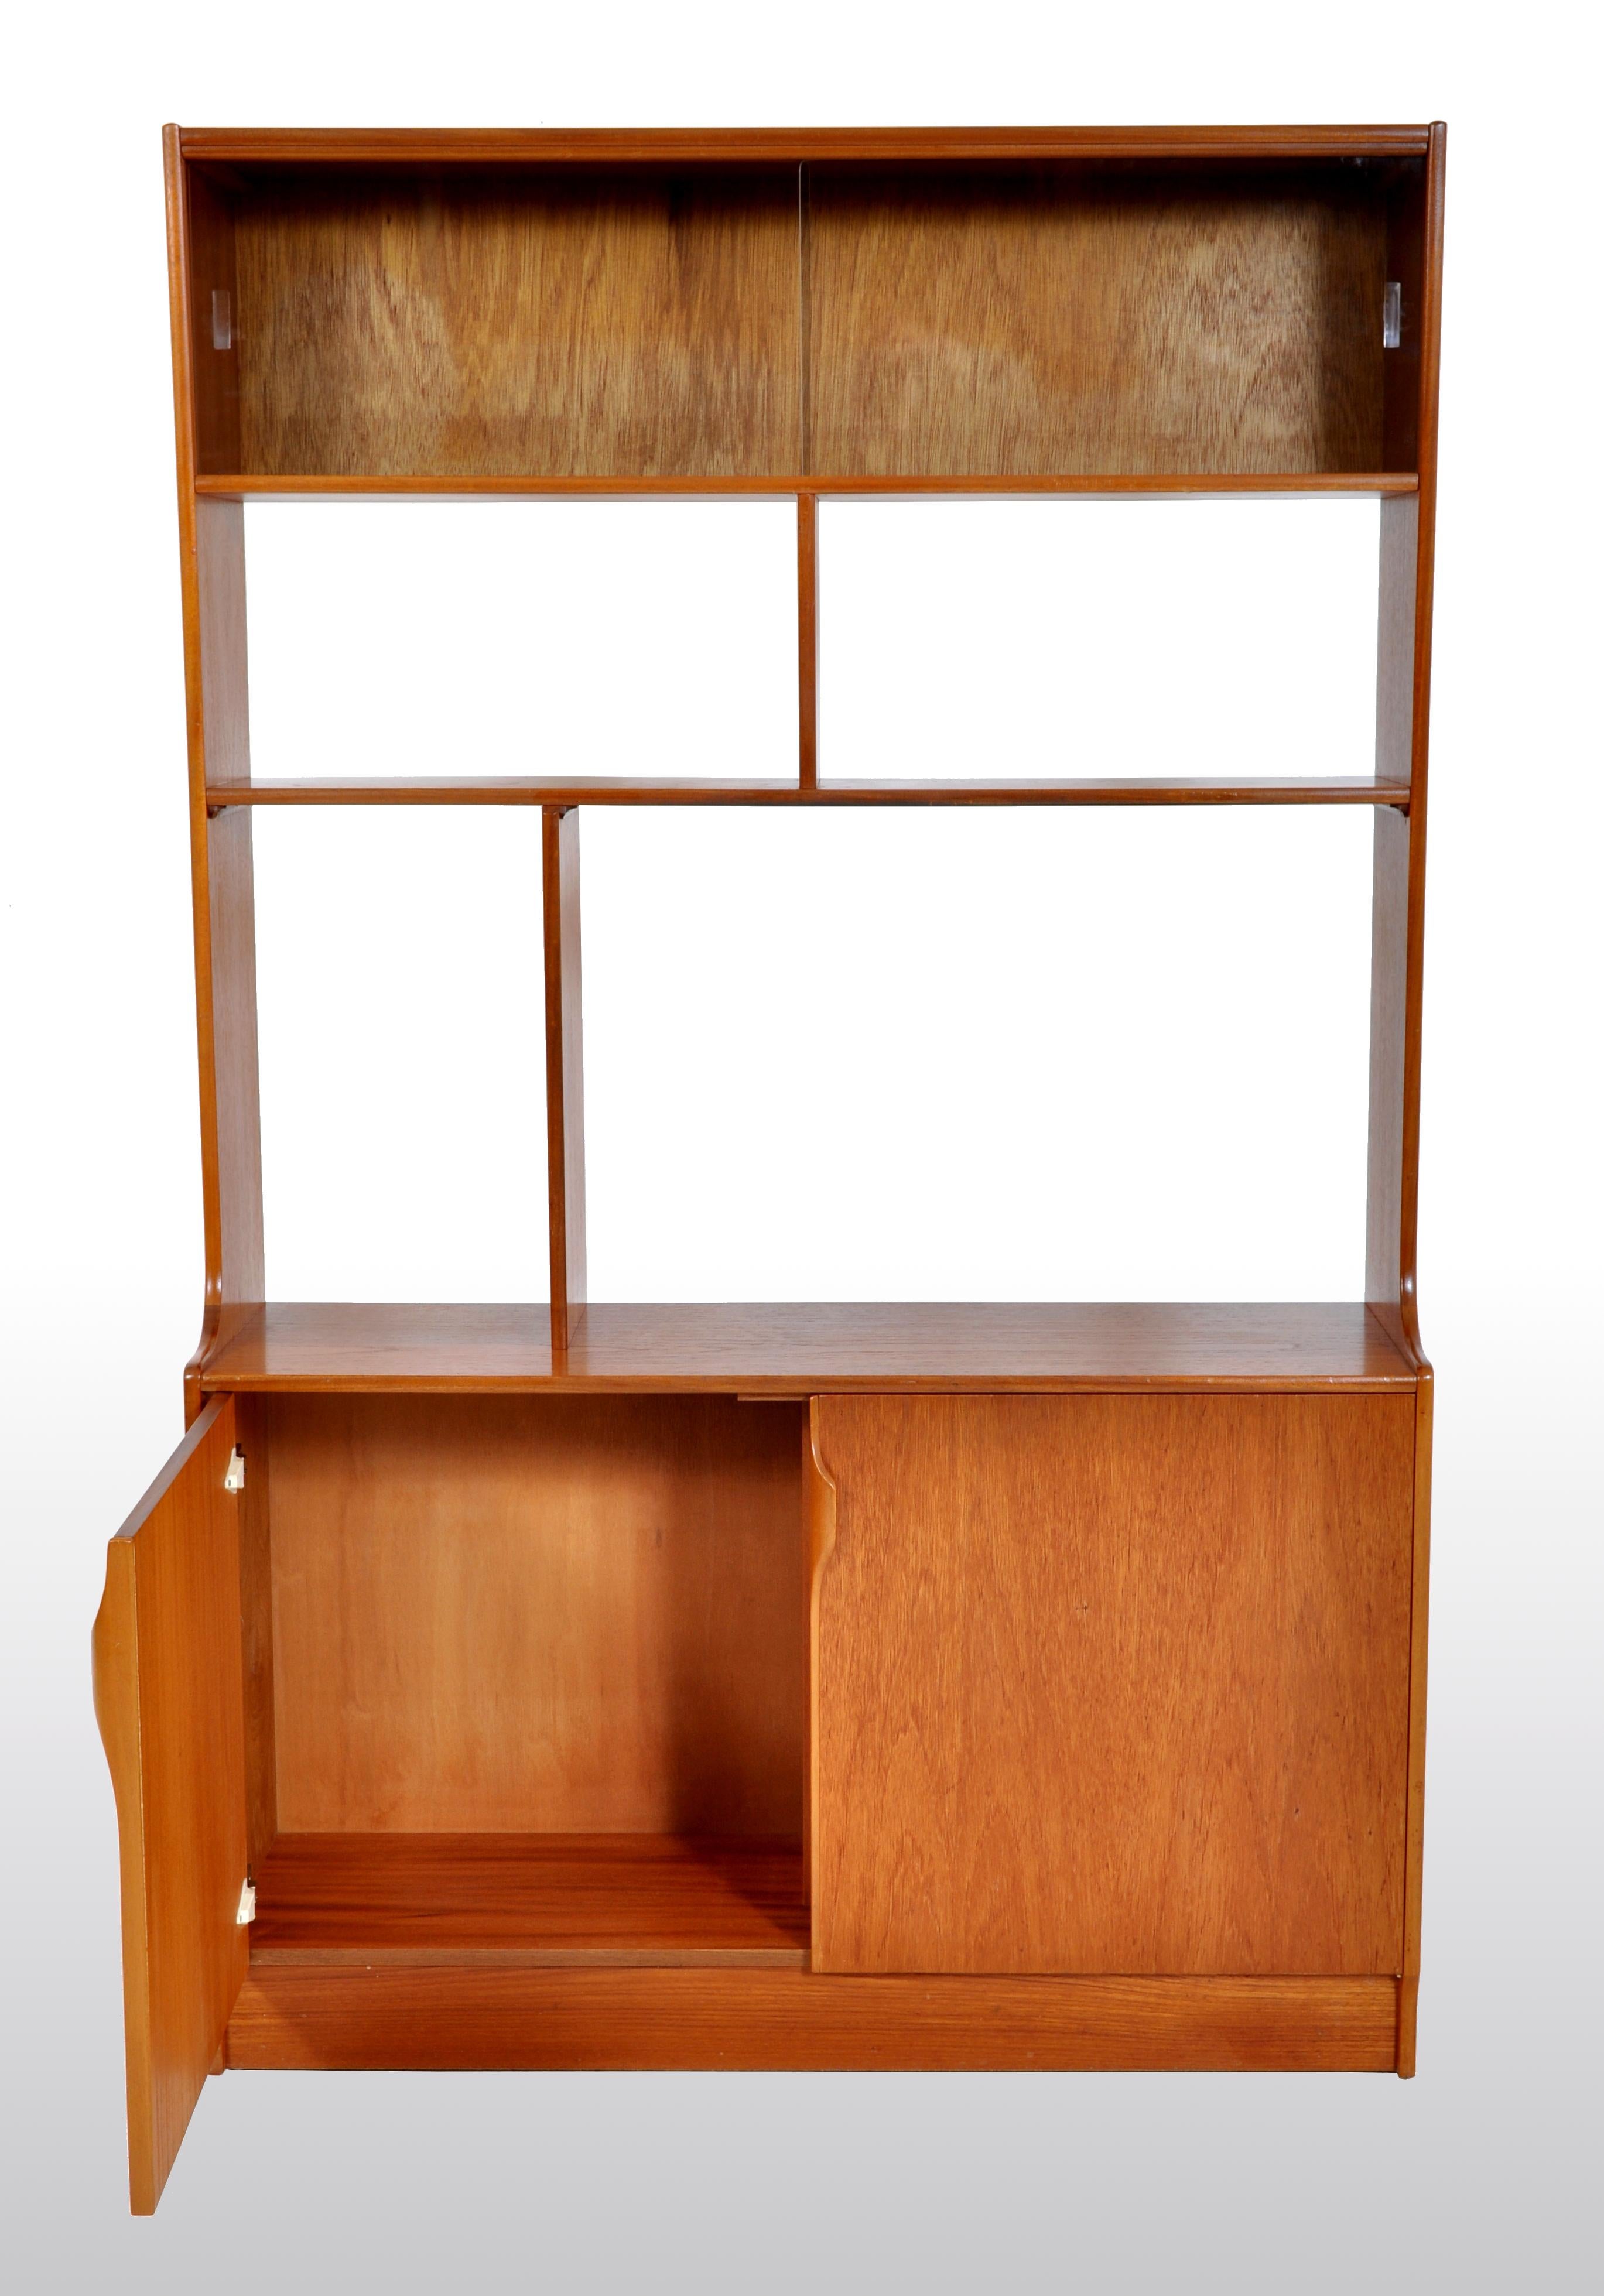 20th Century Mid-Century Modern Danish Style Bookcase / Wall Unit / in Teak by S Form, 1960s